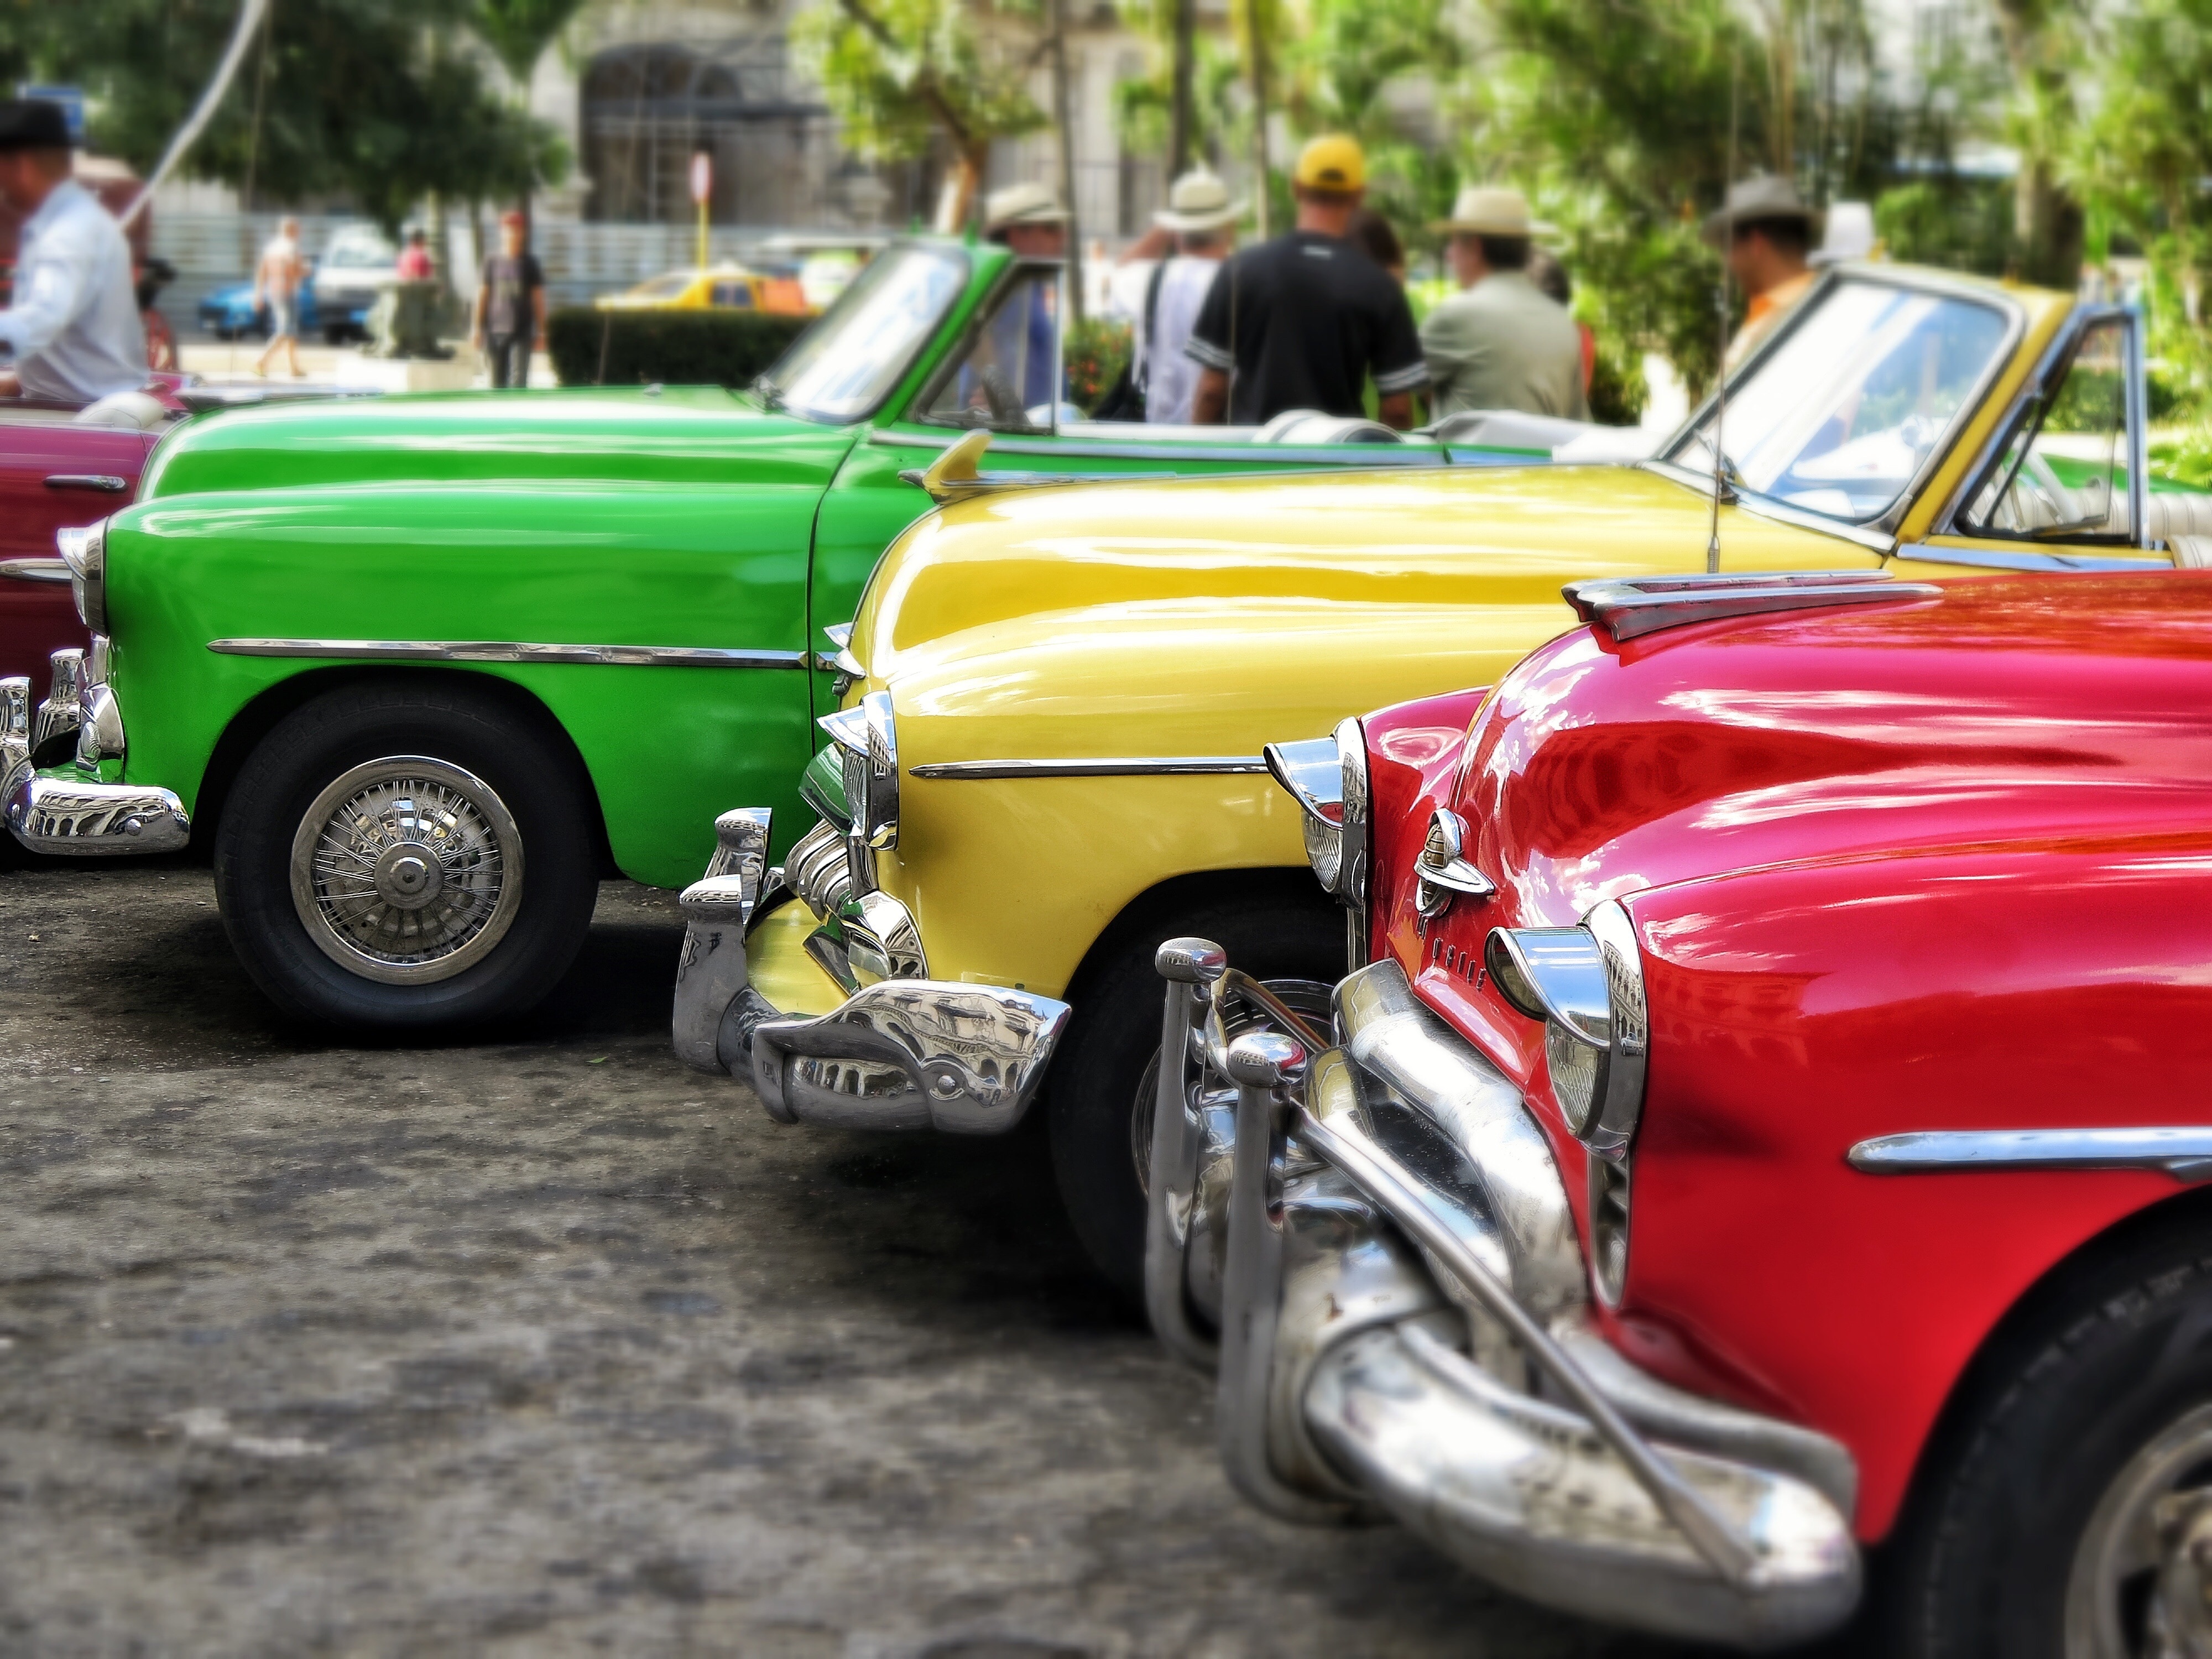 three red, yellow and green classic cars in parked near people at daytime